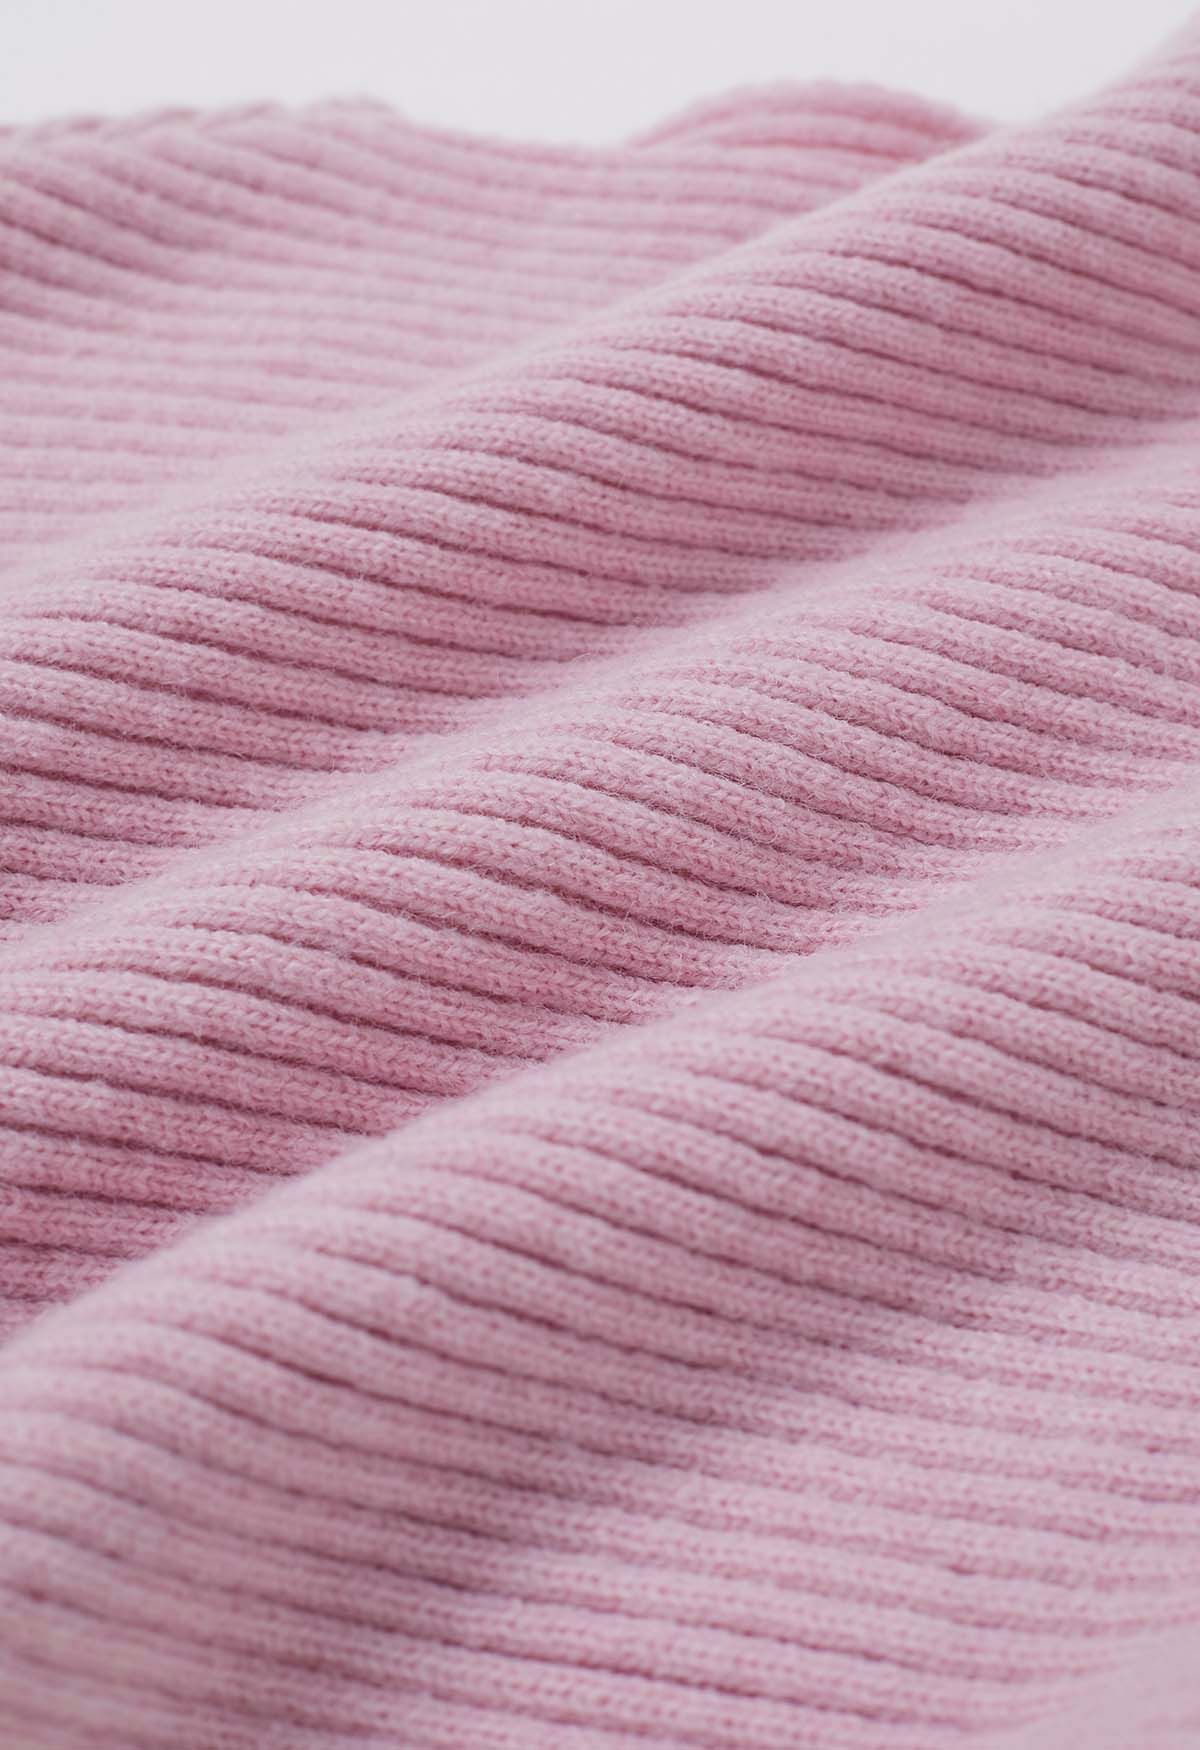 Dramatic Batwing Sleeve Ribbed Knit Sweater in Pink